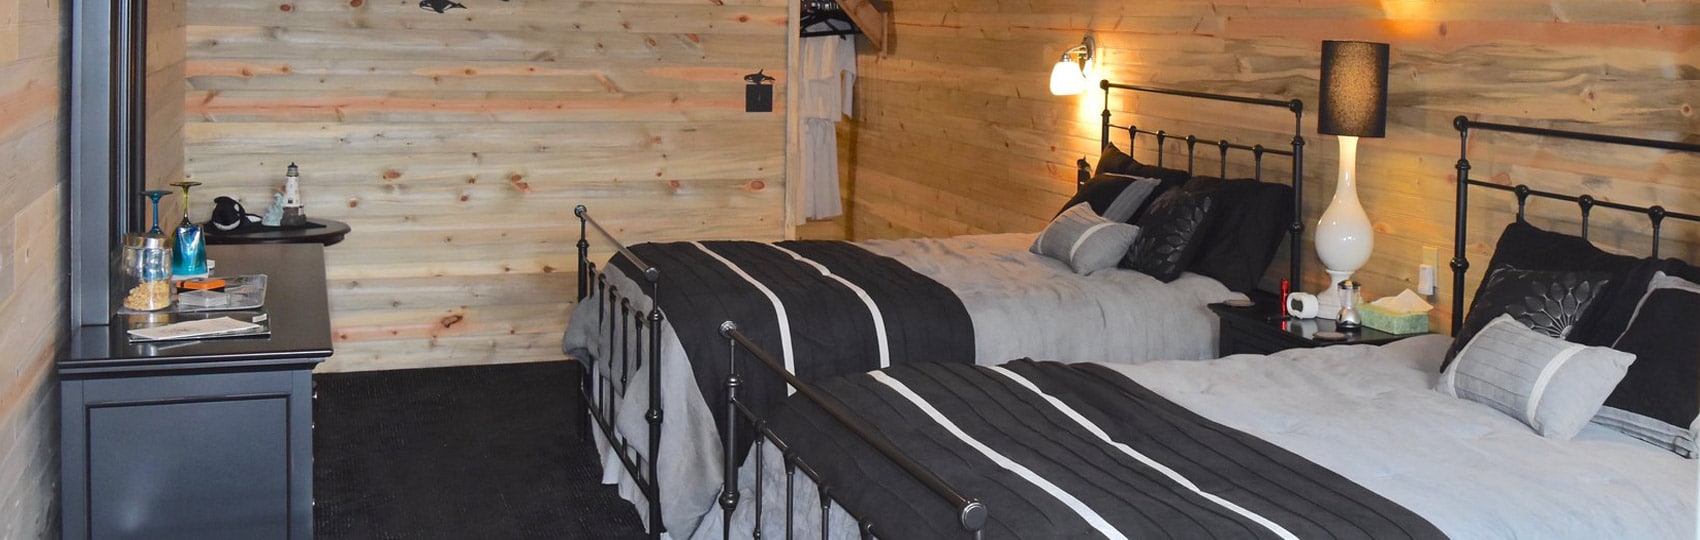 Bedroom accommodations at the lodge.